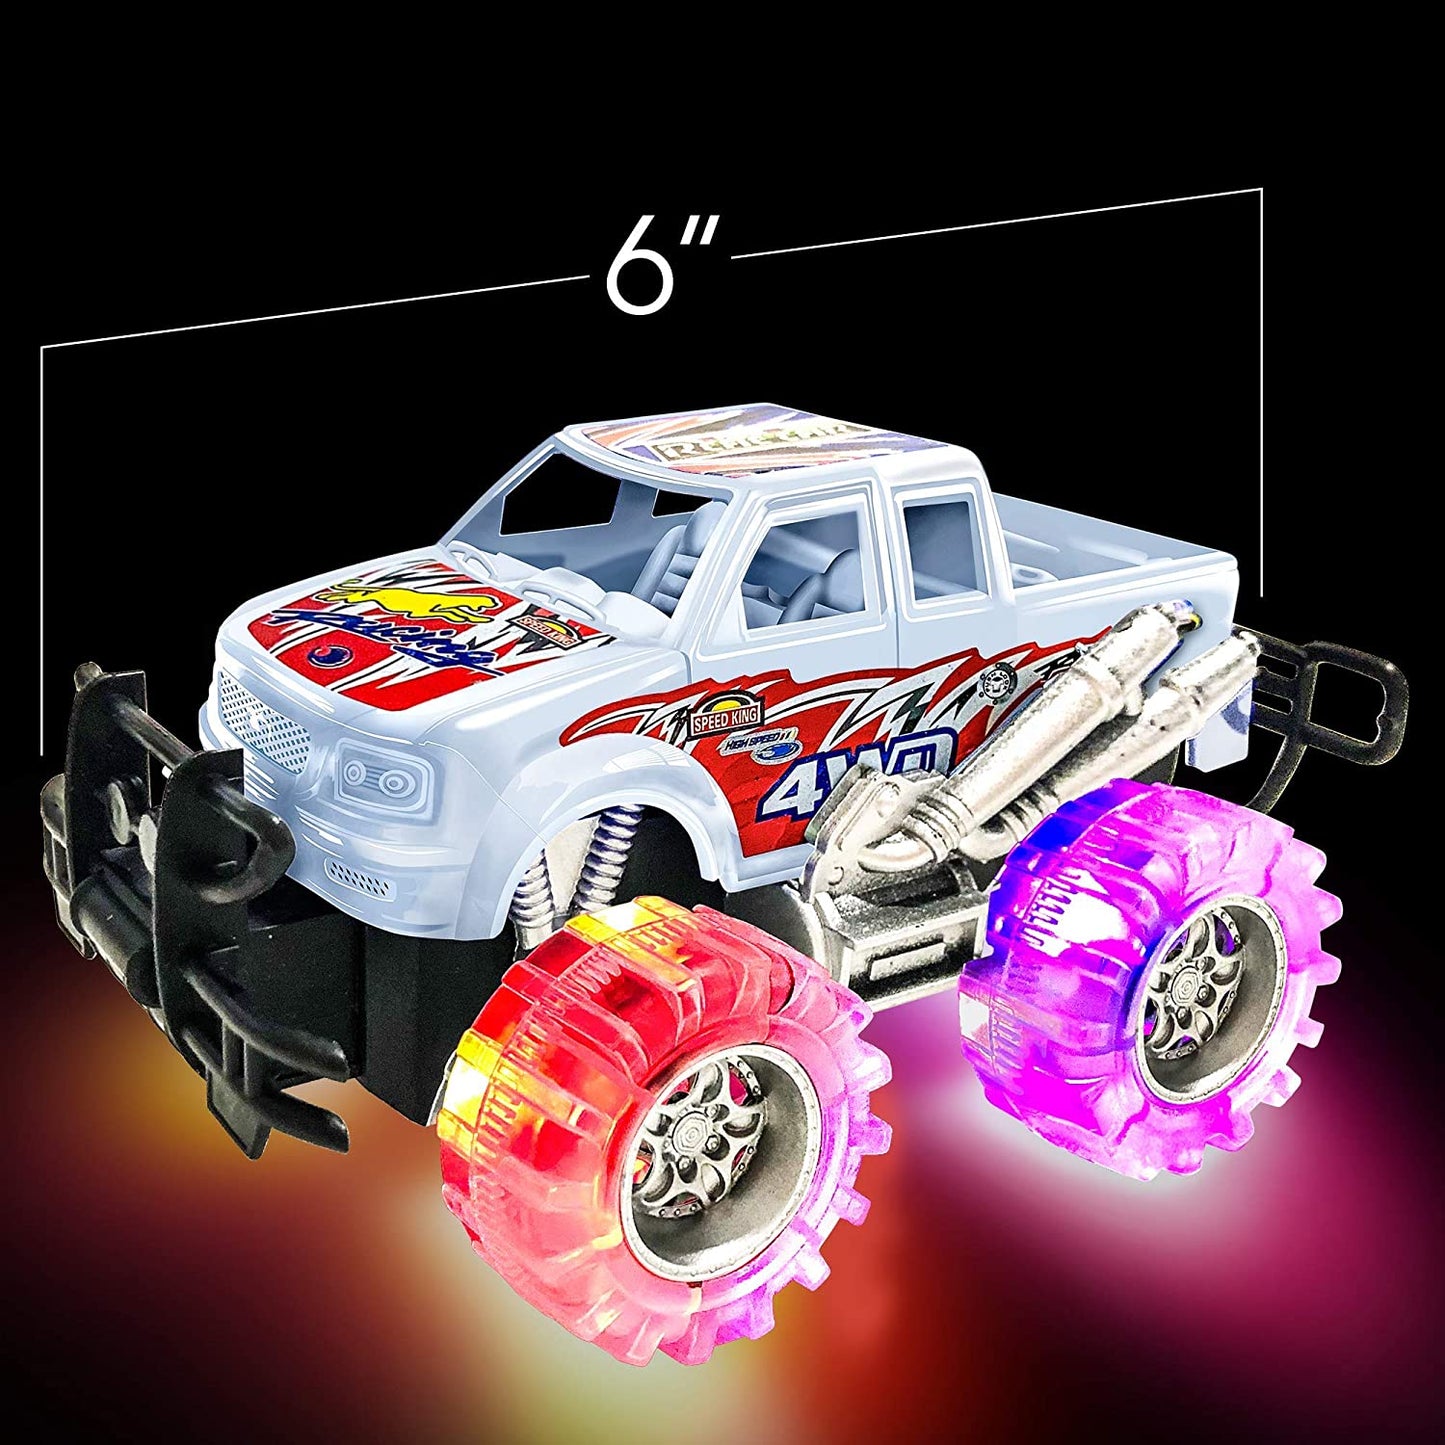 Artcreativity Light up Monster Truck Set for Kids,- Includes 4, 6 Inch Trucks with Beautiful Flashing LED Tires,- Push N Go Toy Cars for Boys and Girls,- Best Gift for Kids Age 3 - 6 Years Old and Up